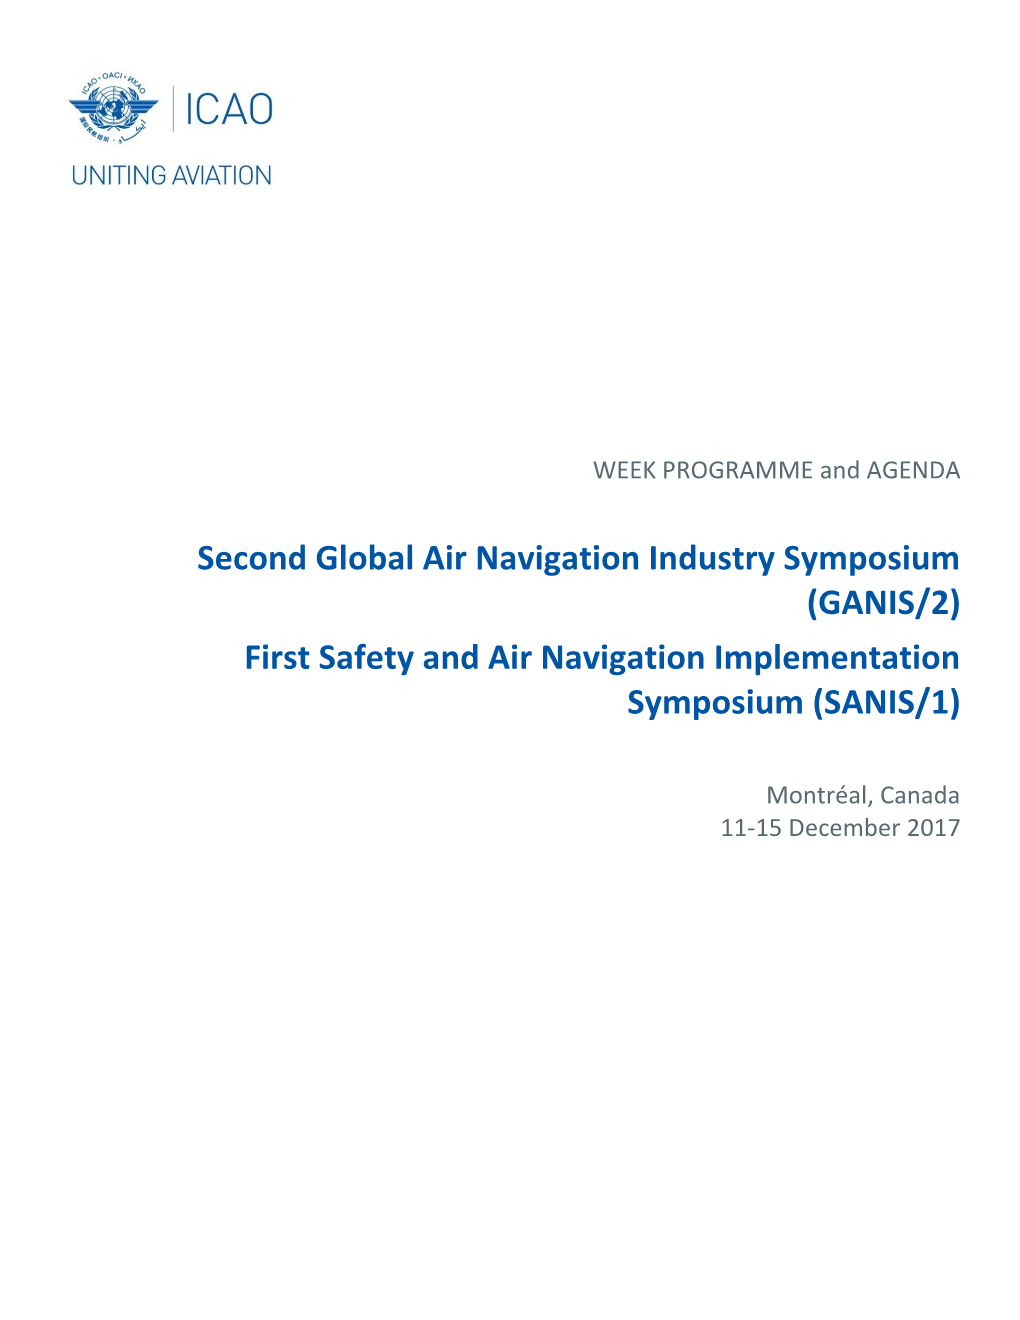 Second Global Air Navigation Industry Symposium (GANIS/2) First Safety and Air Navigation Implementation Symposium (SANIS/1)